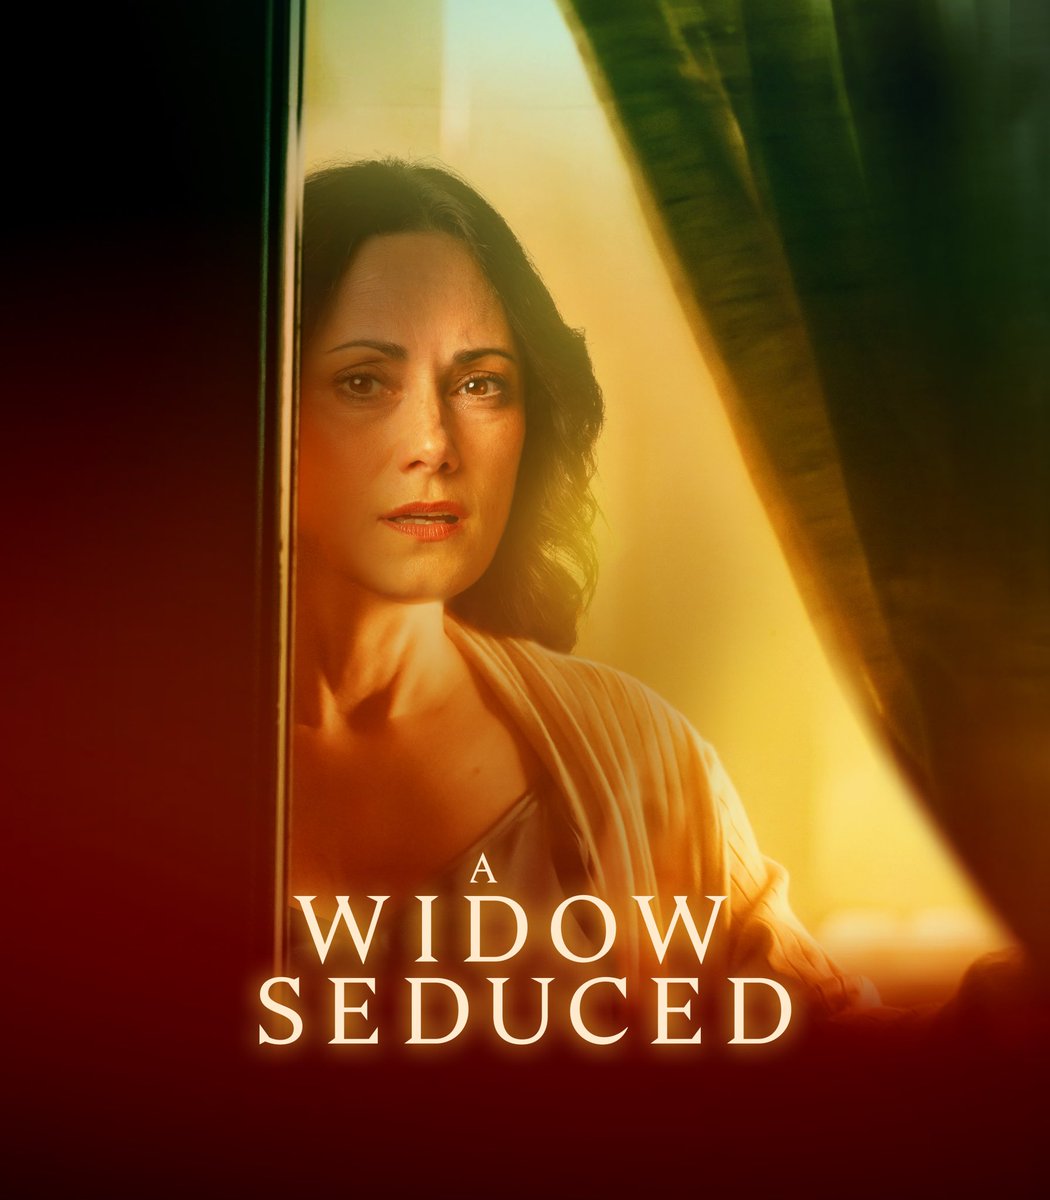 Vortex Productions is proud to announce “A WIDOW SEDUCED” will premiere in 🇨🇦 on Feb 3rd on @superchanneltv & in the 🇺🇸 on Feb 4th on #Lifetime. A career-driven widow falls for a charming businessman that she meets online, only to discover that her new beau has a deadly secret.